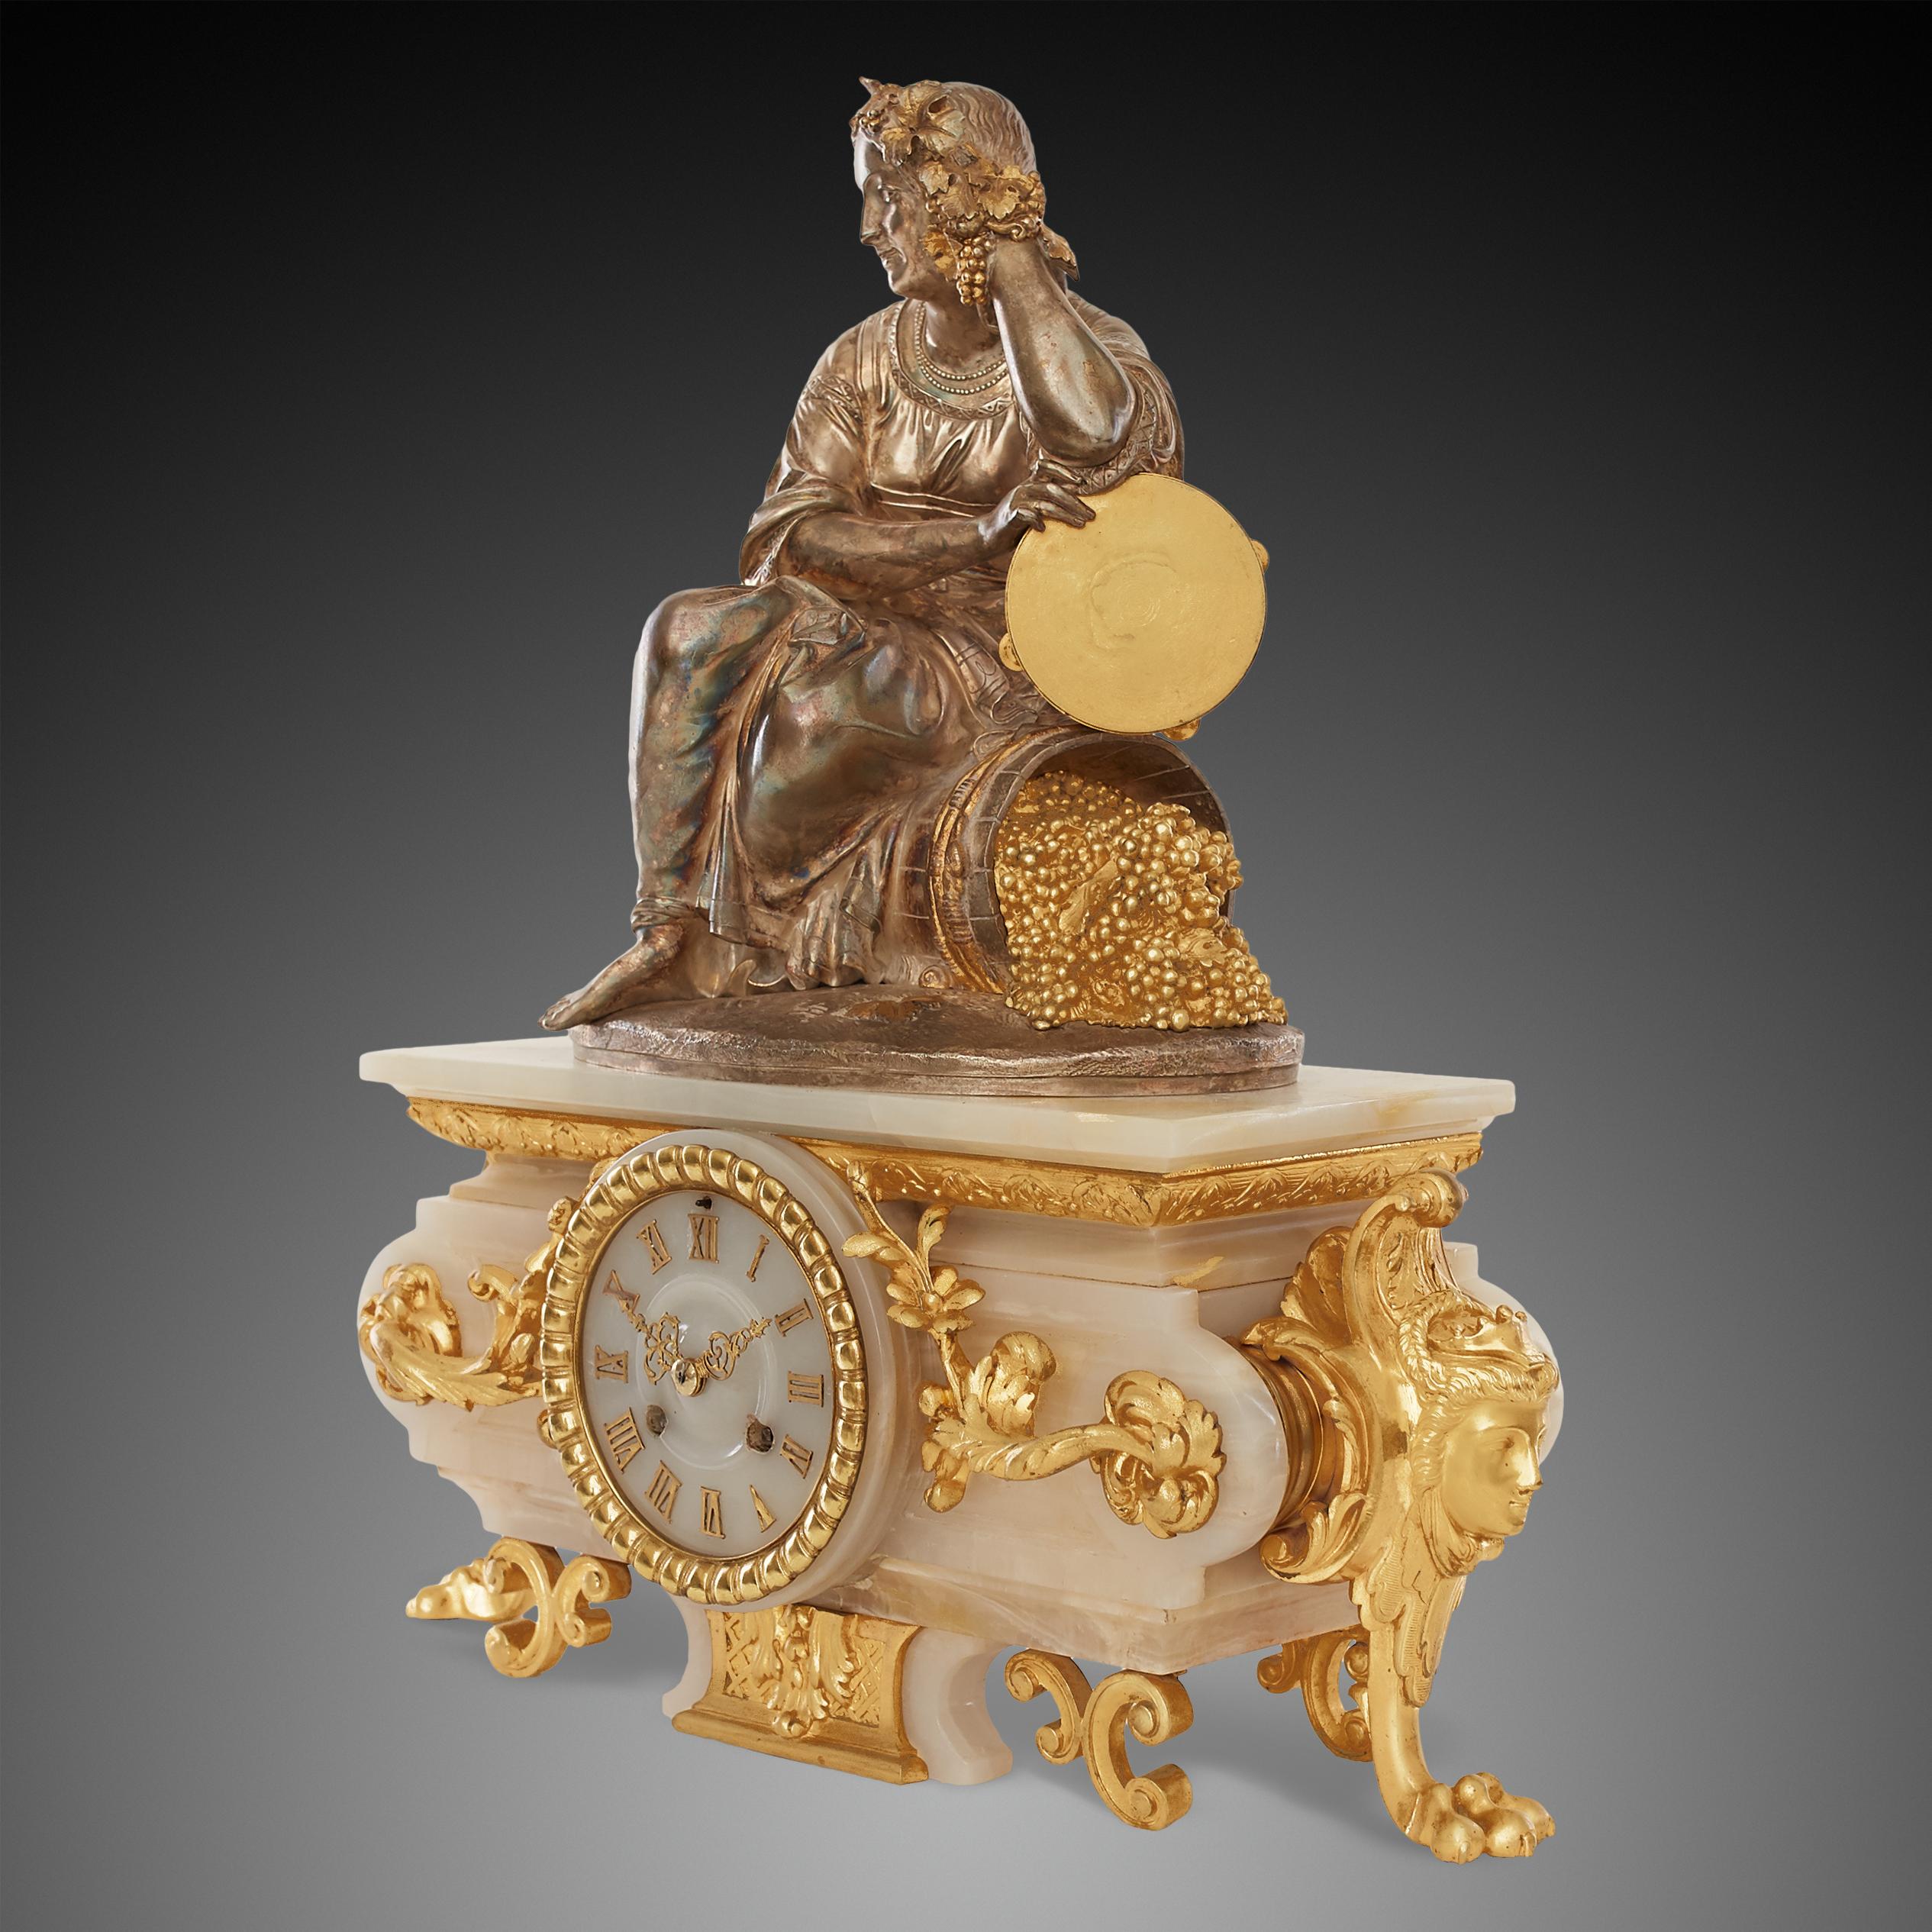 Mantel clock 18th century Louis XV by Picard, Henry (French, FL. 1831-1864)
Henri Picard was a prestigious 19th century fondeur and doreur, who worked in Paris between the years of 1831 and 1864. Picard was celebrated for casting and gilding